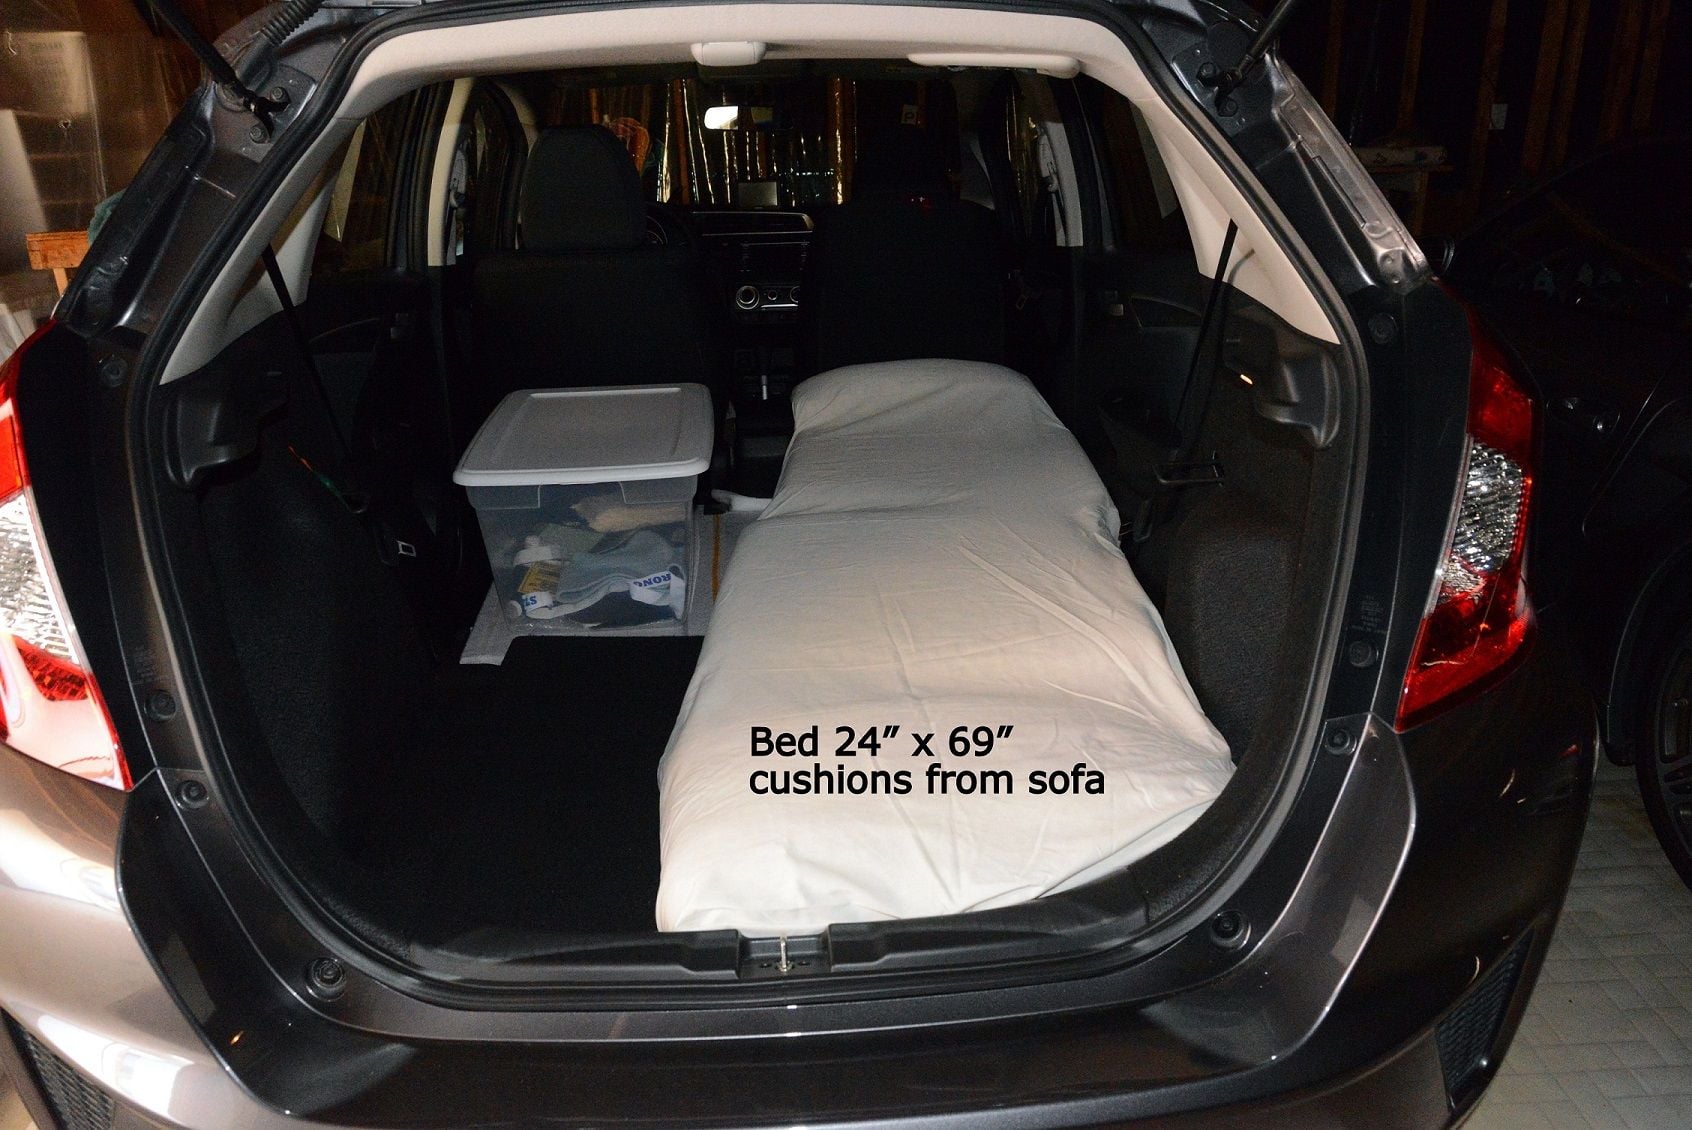 mattress for sleeping in a honda fit